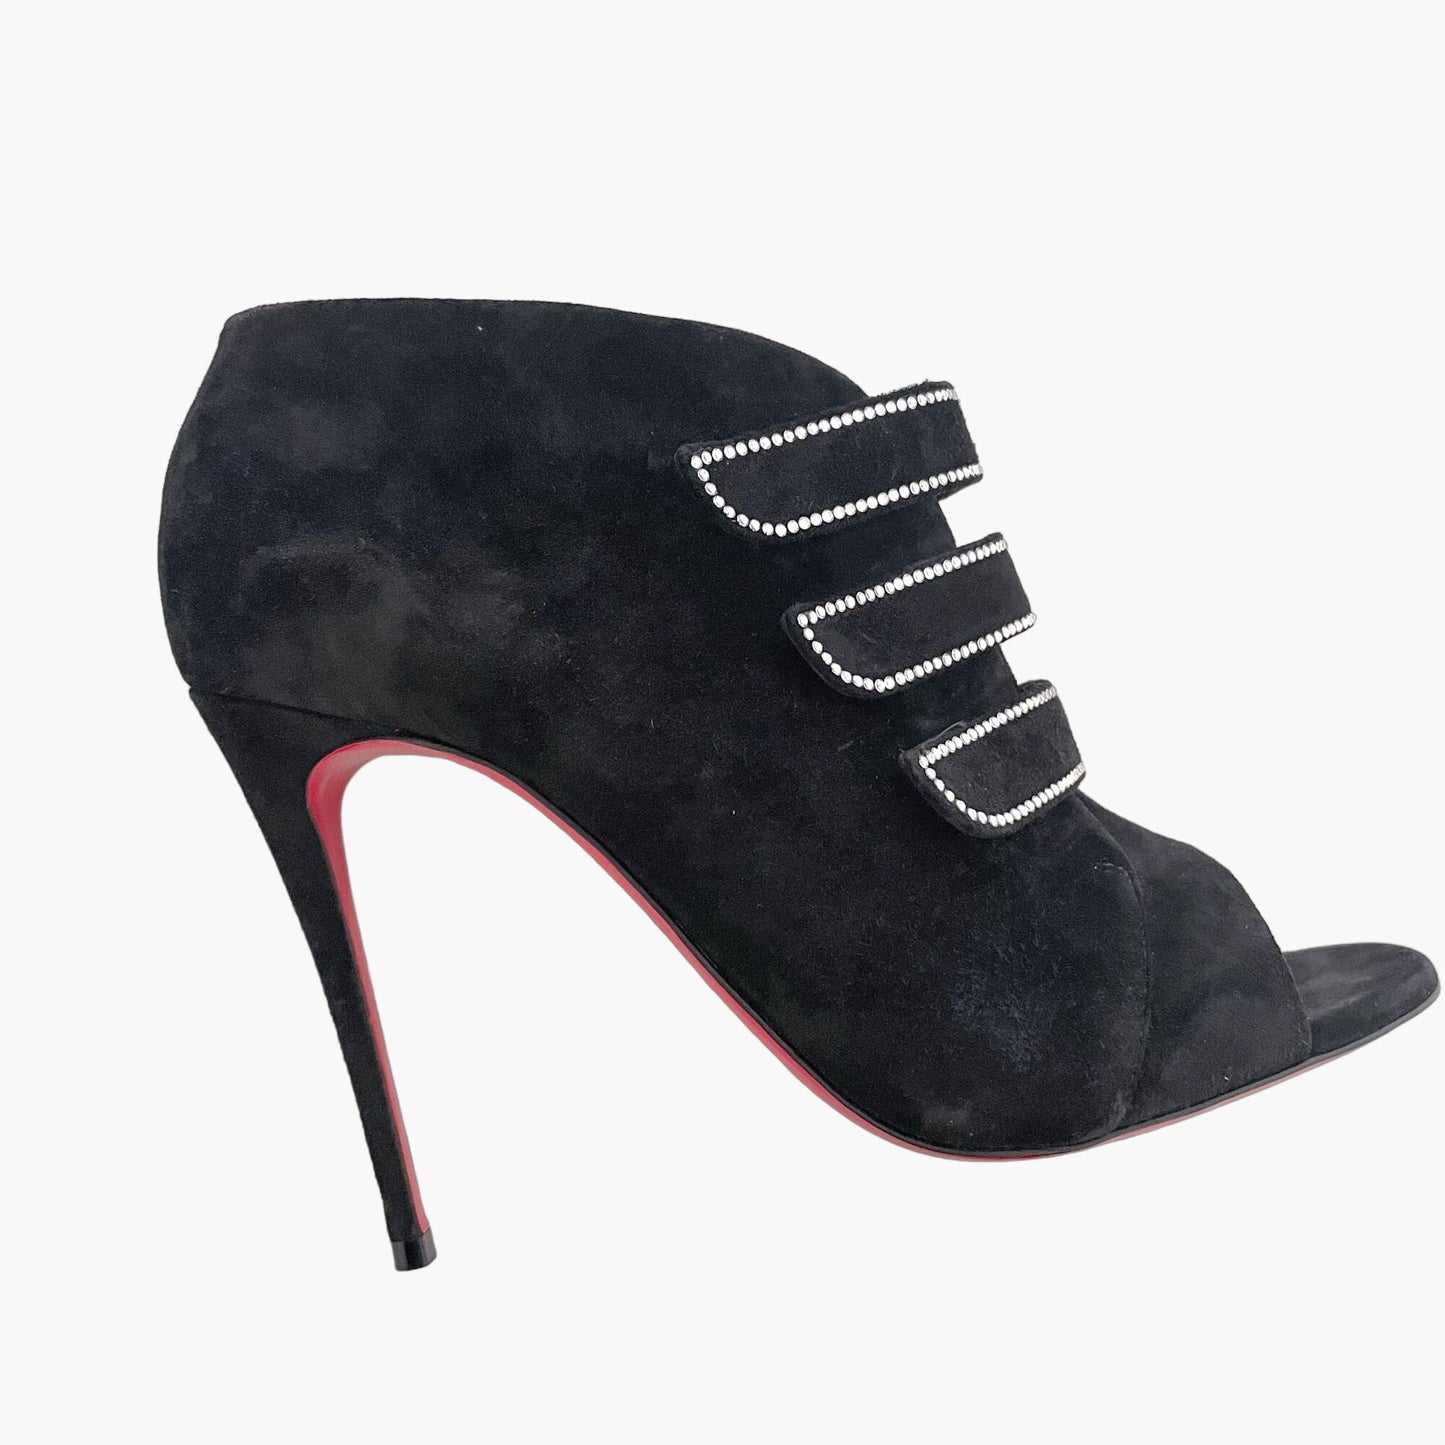 Christian Louboutin Triplica Strass 100 Booties in Black Suede Size 37